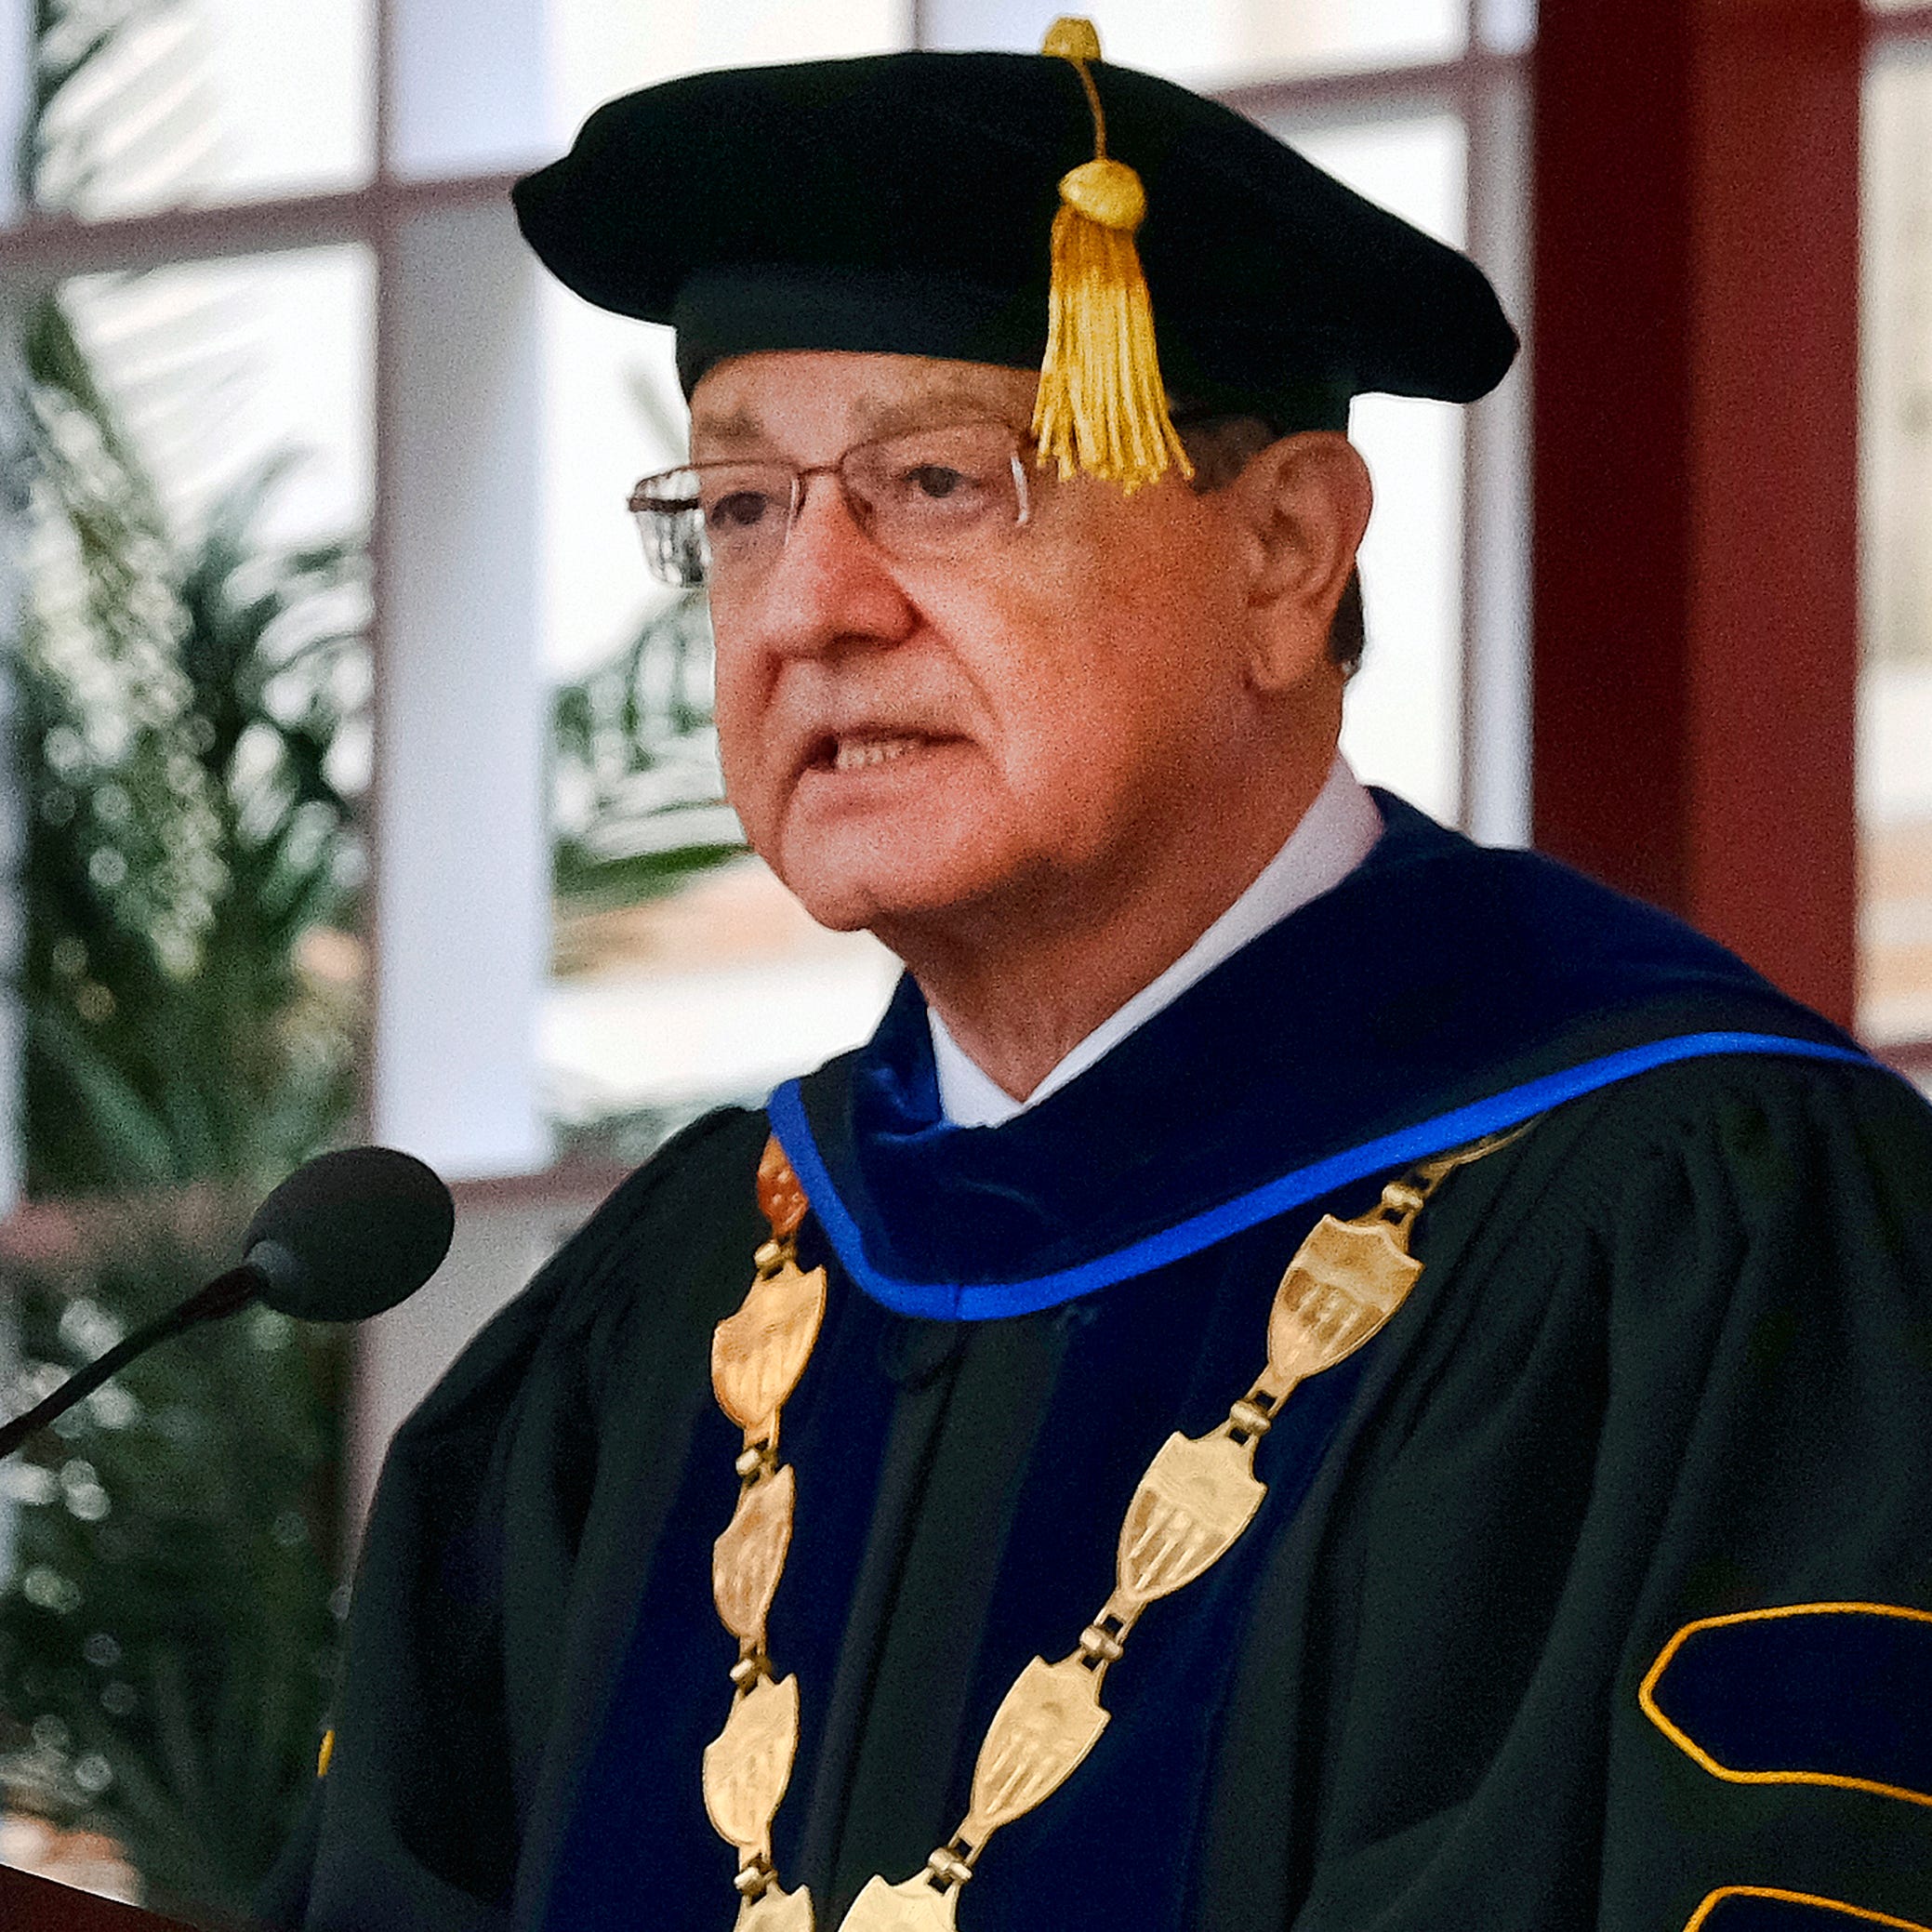 USC President C.L. Max Nikias presides at commencement ceremonies on the campus in Los Angeles.